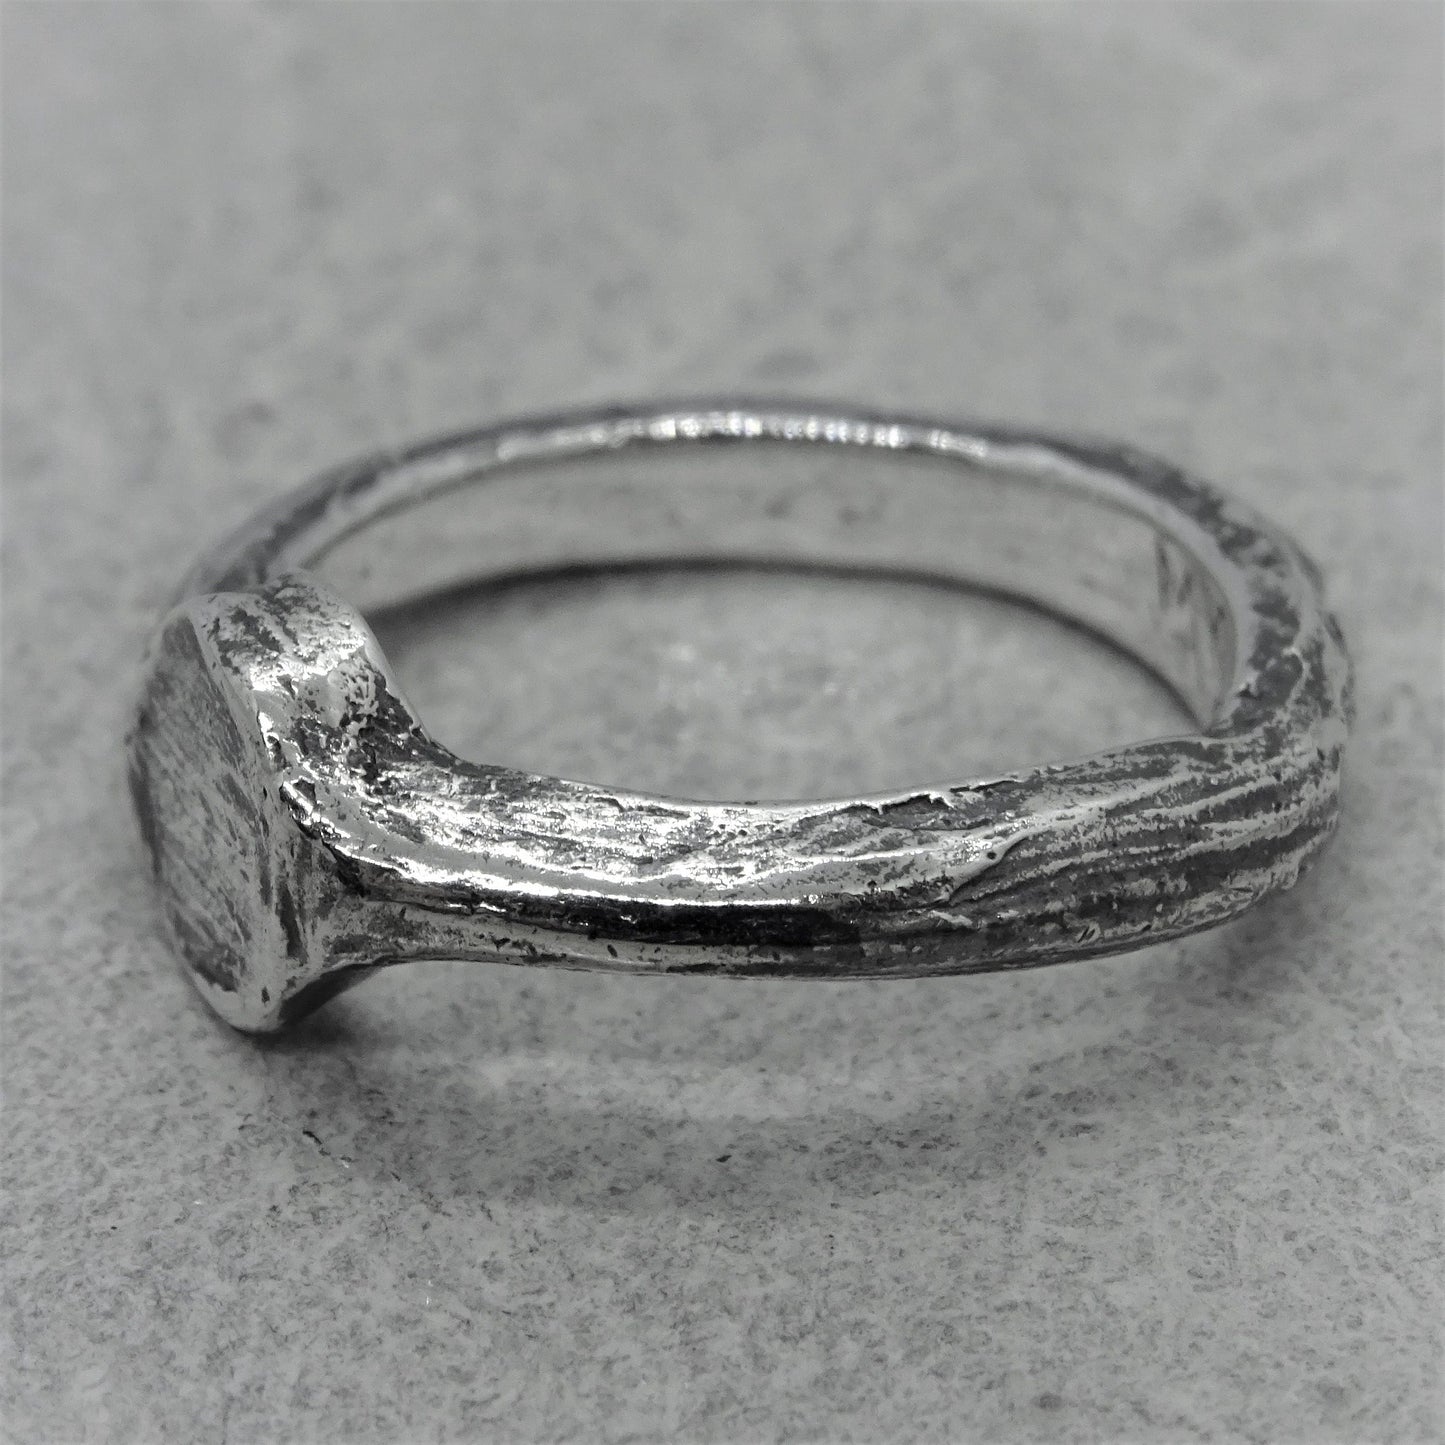 Moon ring - Lightweight asymmetrical ring with soft scratched texture Lightweight rings Project50g 